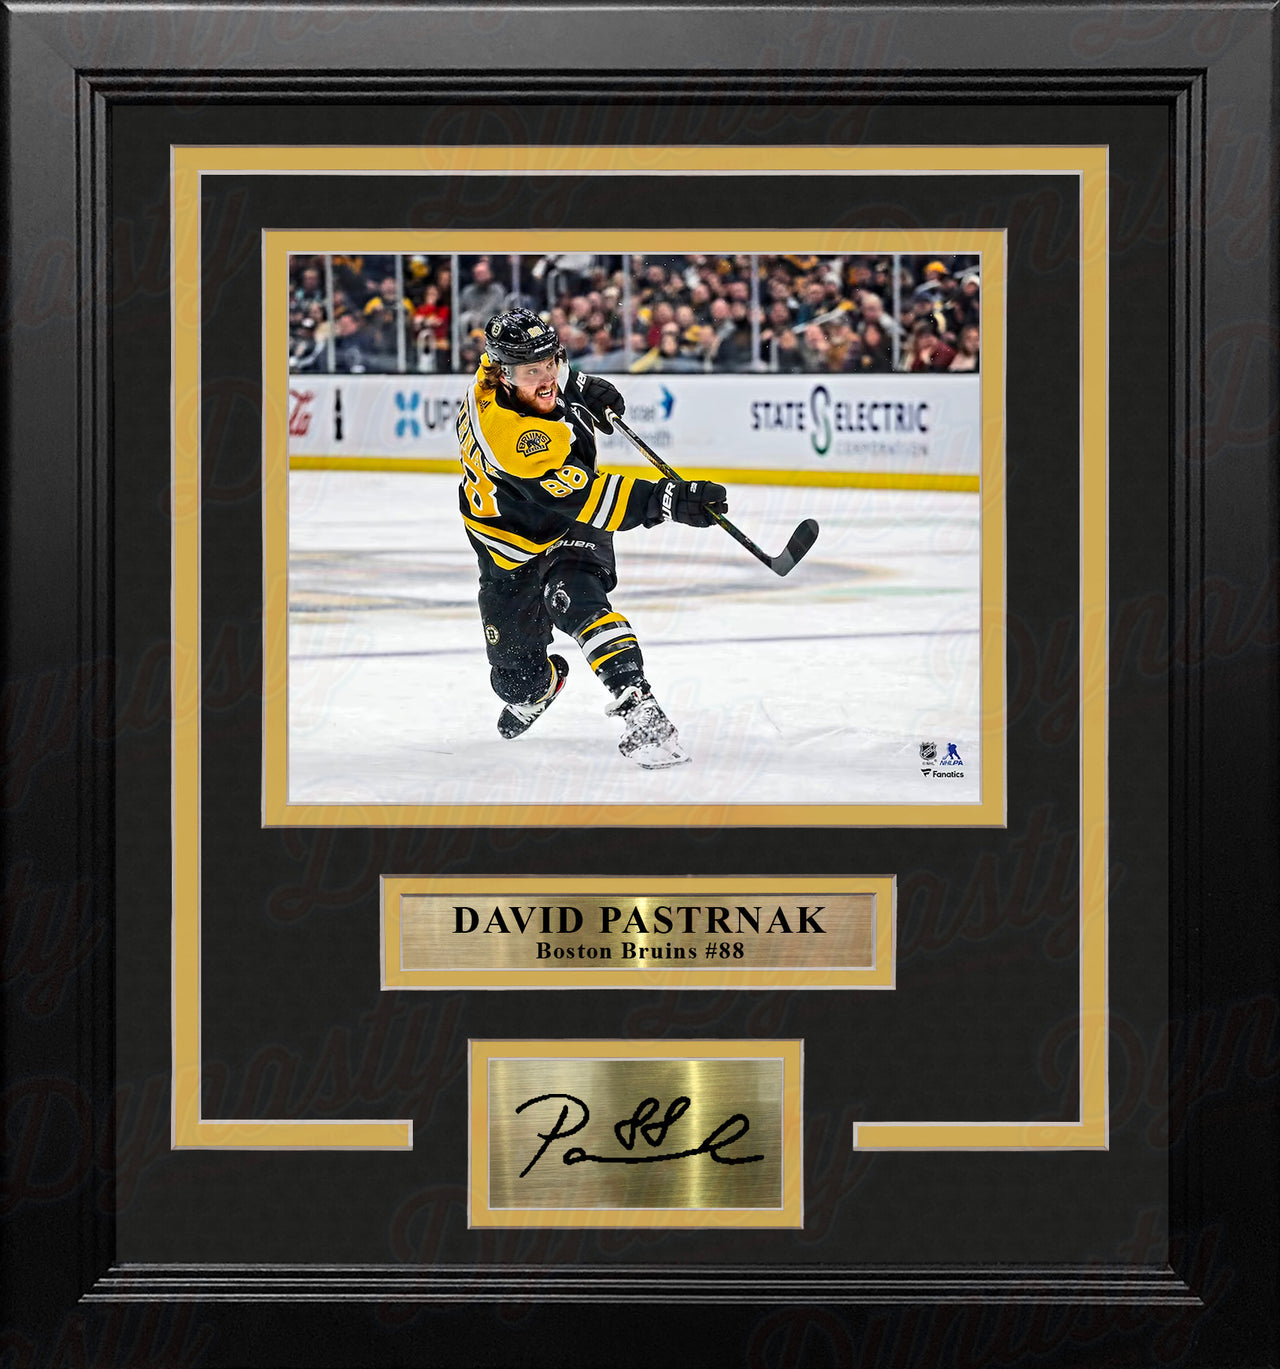 David Pastrnak Shooting Action Boston Bruins 8" x 10" Framed Hockey Photo with Engraved Autograph - Dynasty Sports & Framing 